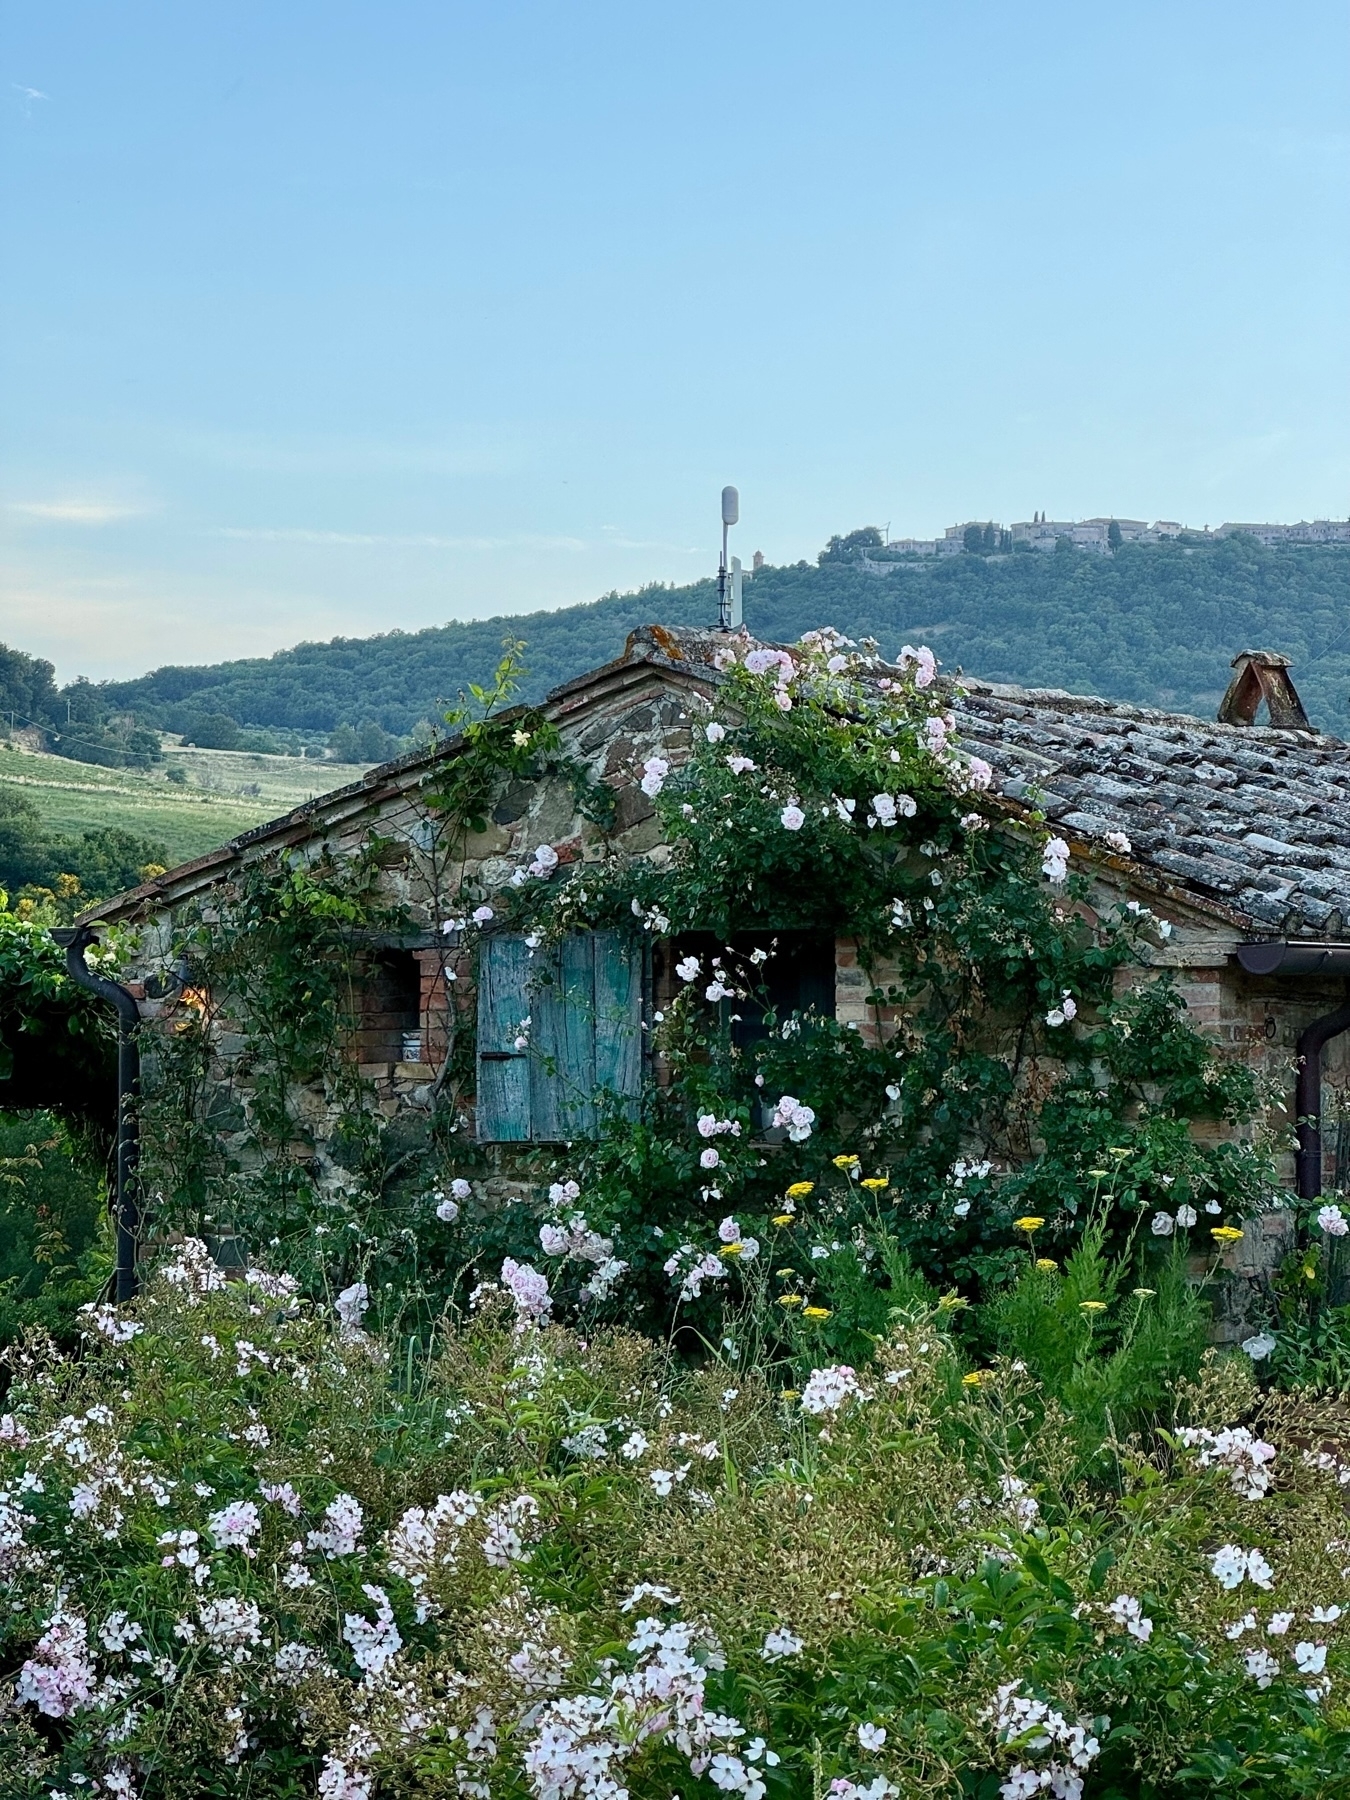 A picturesque stone cottage covered in climbing roses and surrounded by a lush garden with wildflowers. The cottage features a rustic tiled roof and weathered blue-green window shutters. The backdrop consists of rolling hills and distant trees, under a clear blue sky.